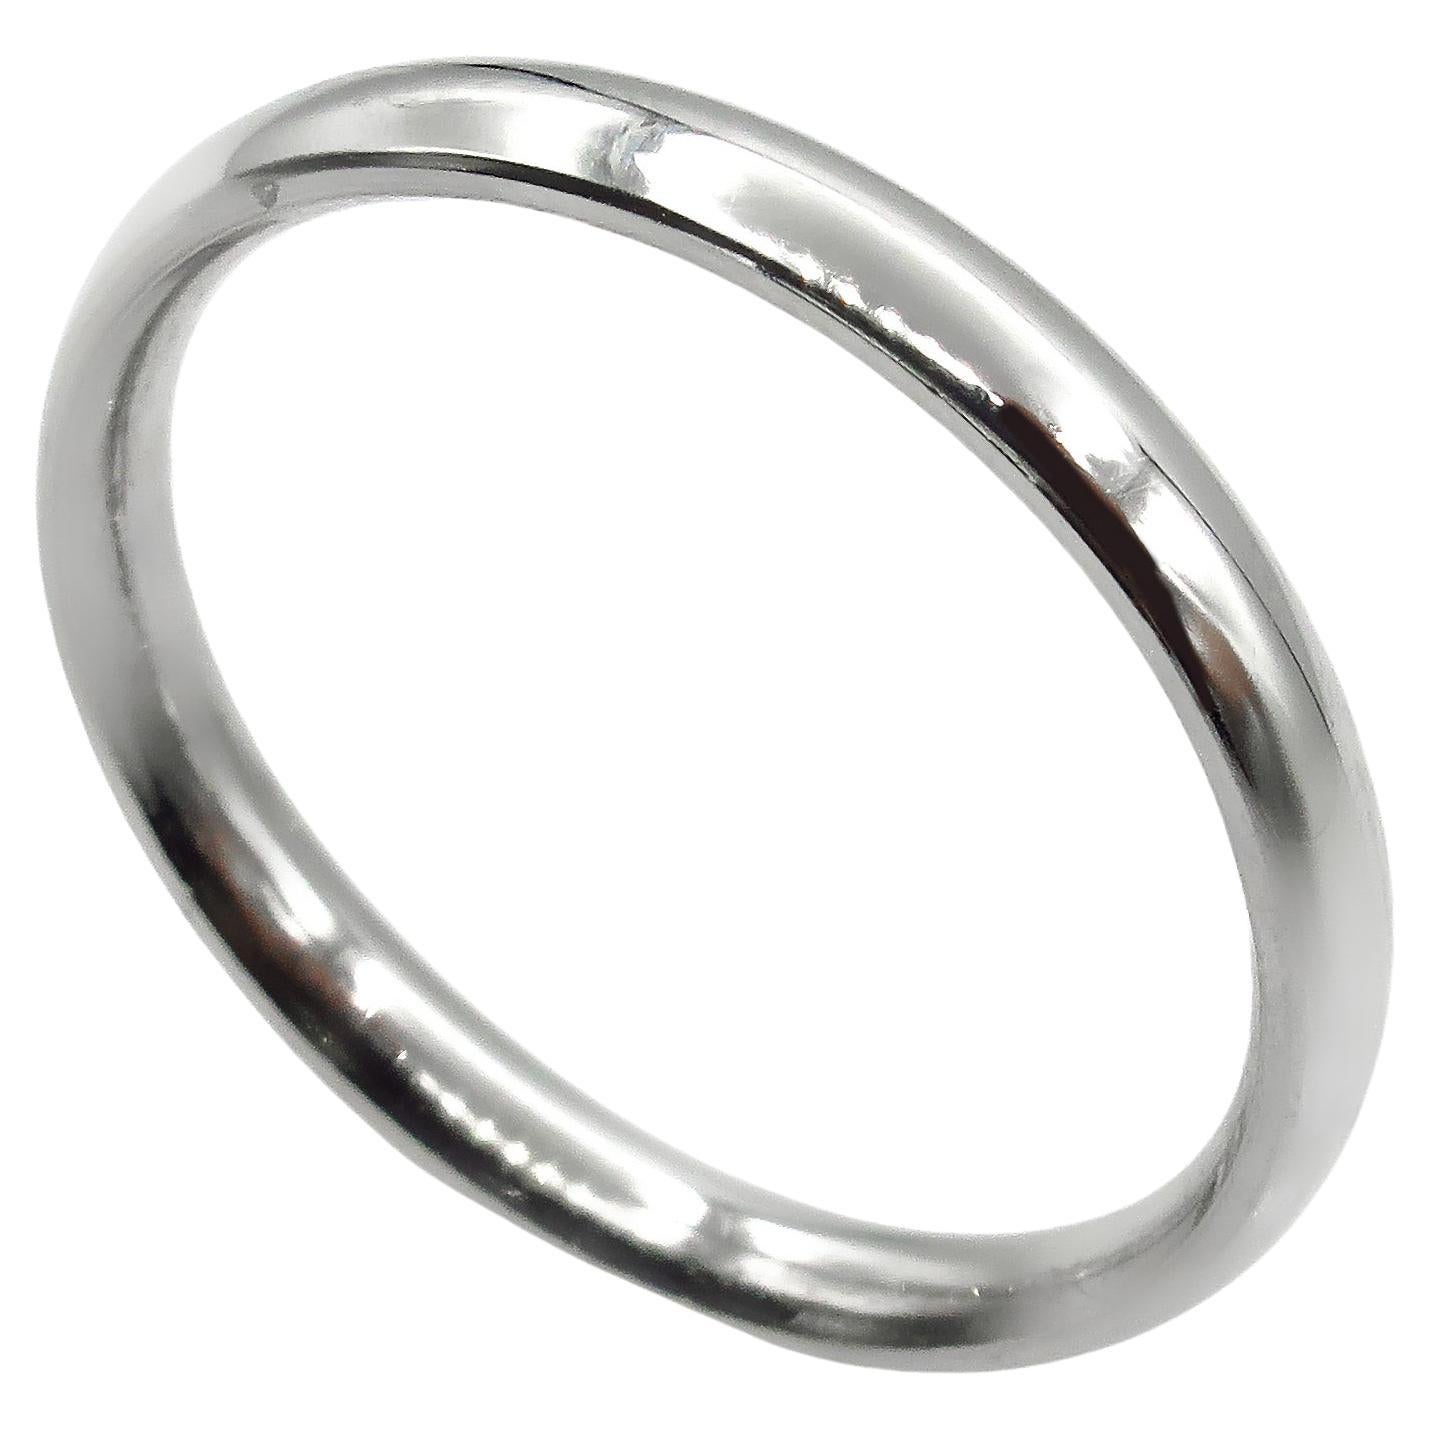 4 MM SOLID PLATINUM PLAIN HIGH POLISHED DOME WEDDING BAND RING size 10 COMFORT FIT by Benchmark

A COMFORT FIT 4 MM PLATINUM 950 WEDDING BAND in size 10. Can be slightly sized smaller or larger. The band is made out of SOLID PLATINUM. High Polished.